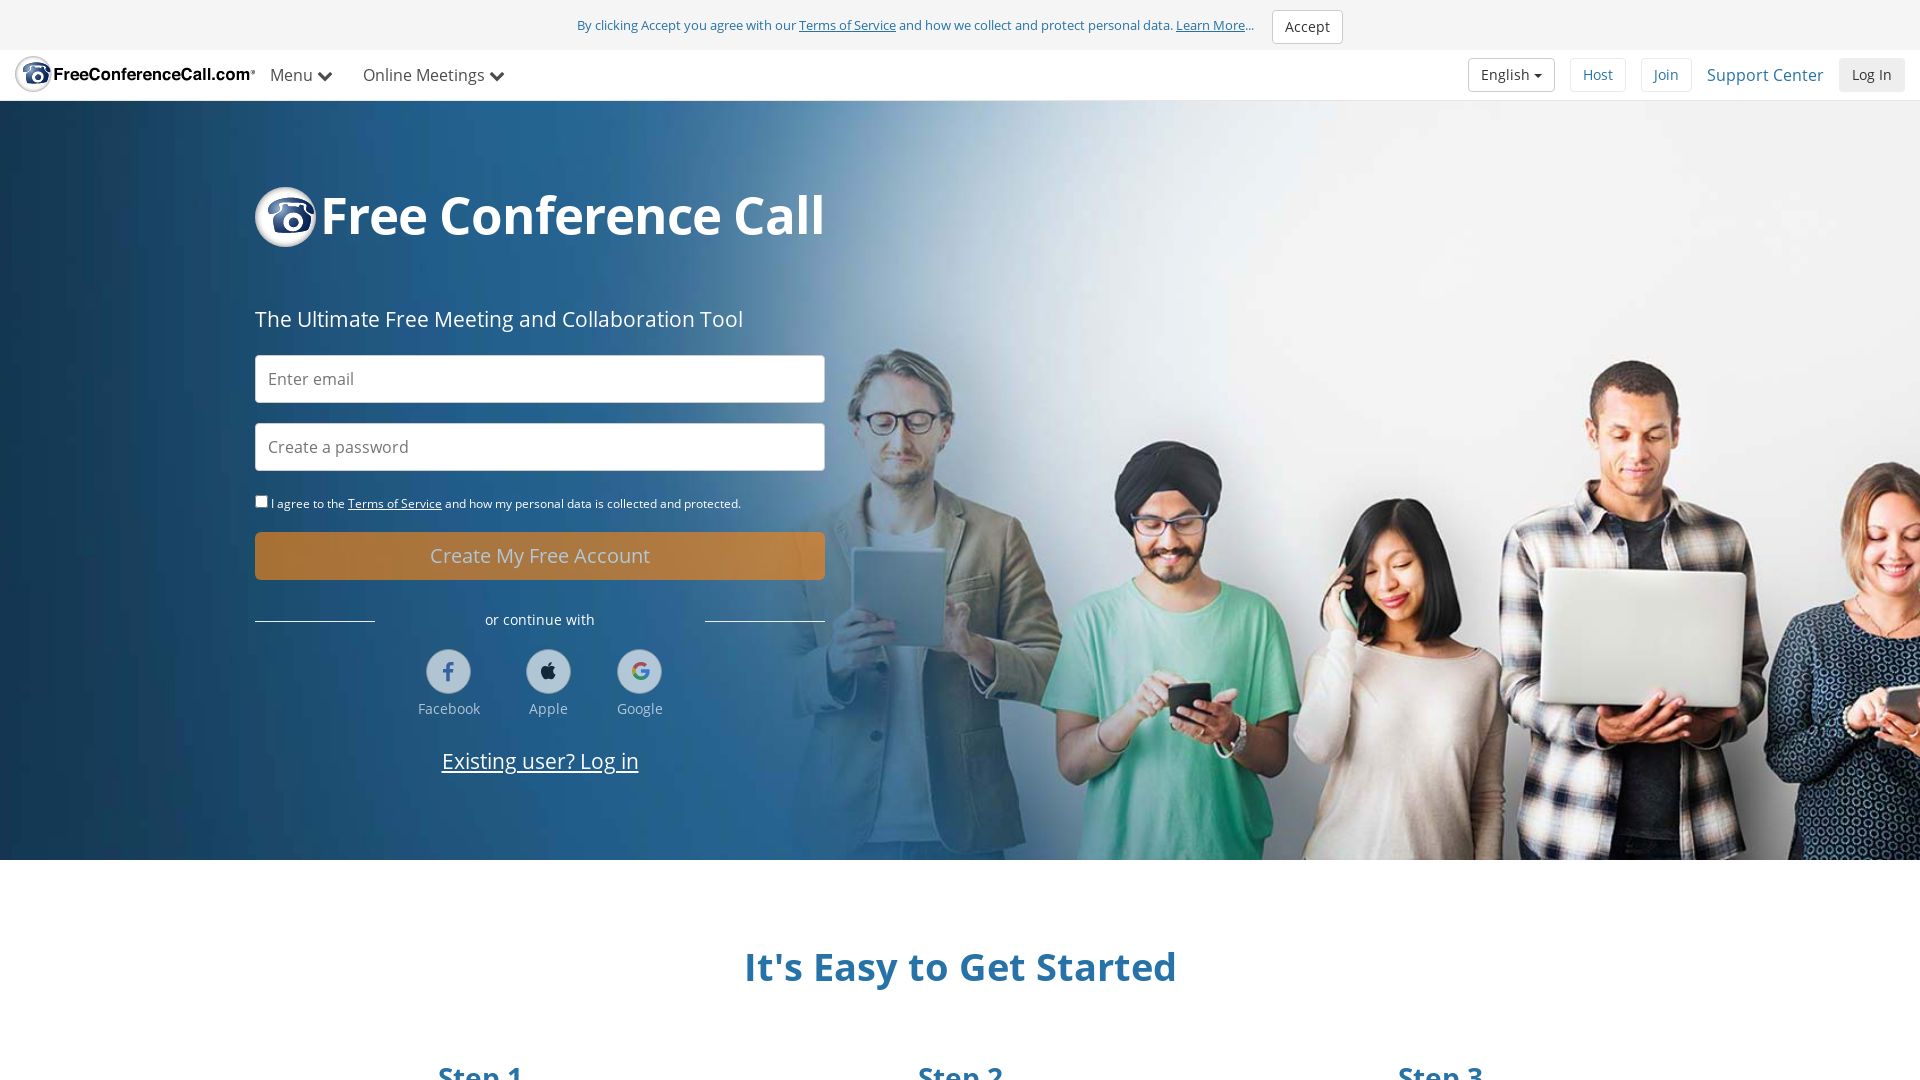 Website status freeconferencecall.com is   ONLINE